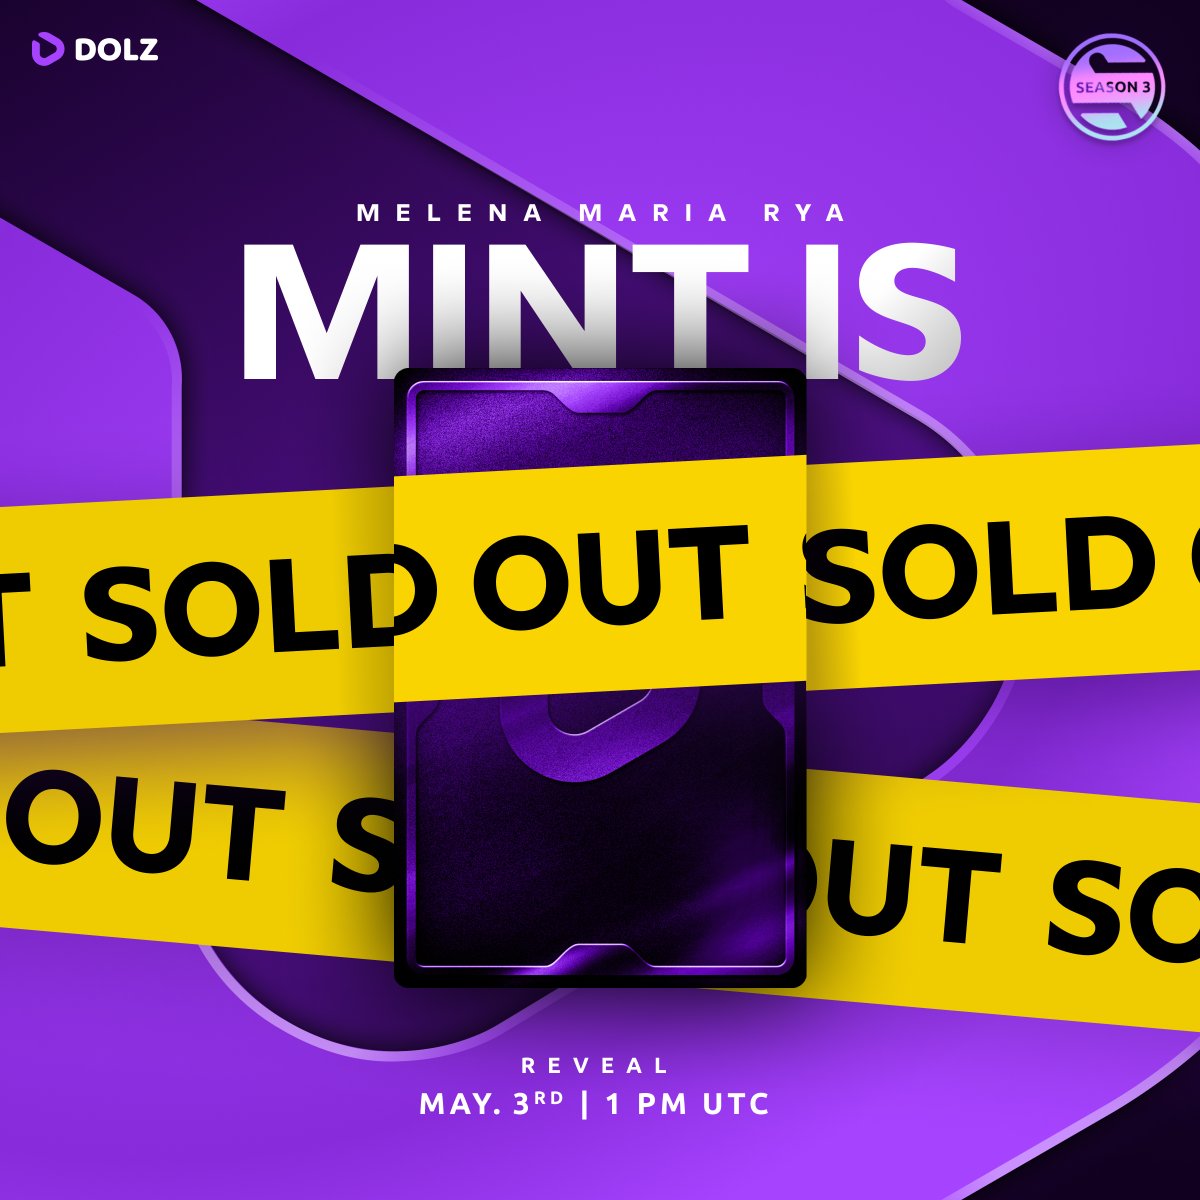 SOOOOOLD OUT! Again. REVEAL | May 3rd at 1 pm UTC. @MelenaMariaRya_’s XR Card has been SOLD OUT within 1 MINUTE. Trade your #NFTs on the brand-new DOLZ NFT Marketplace.💜